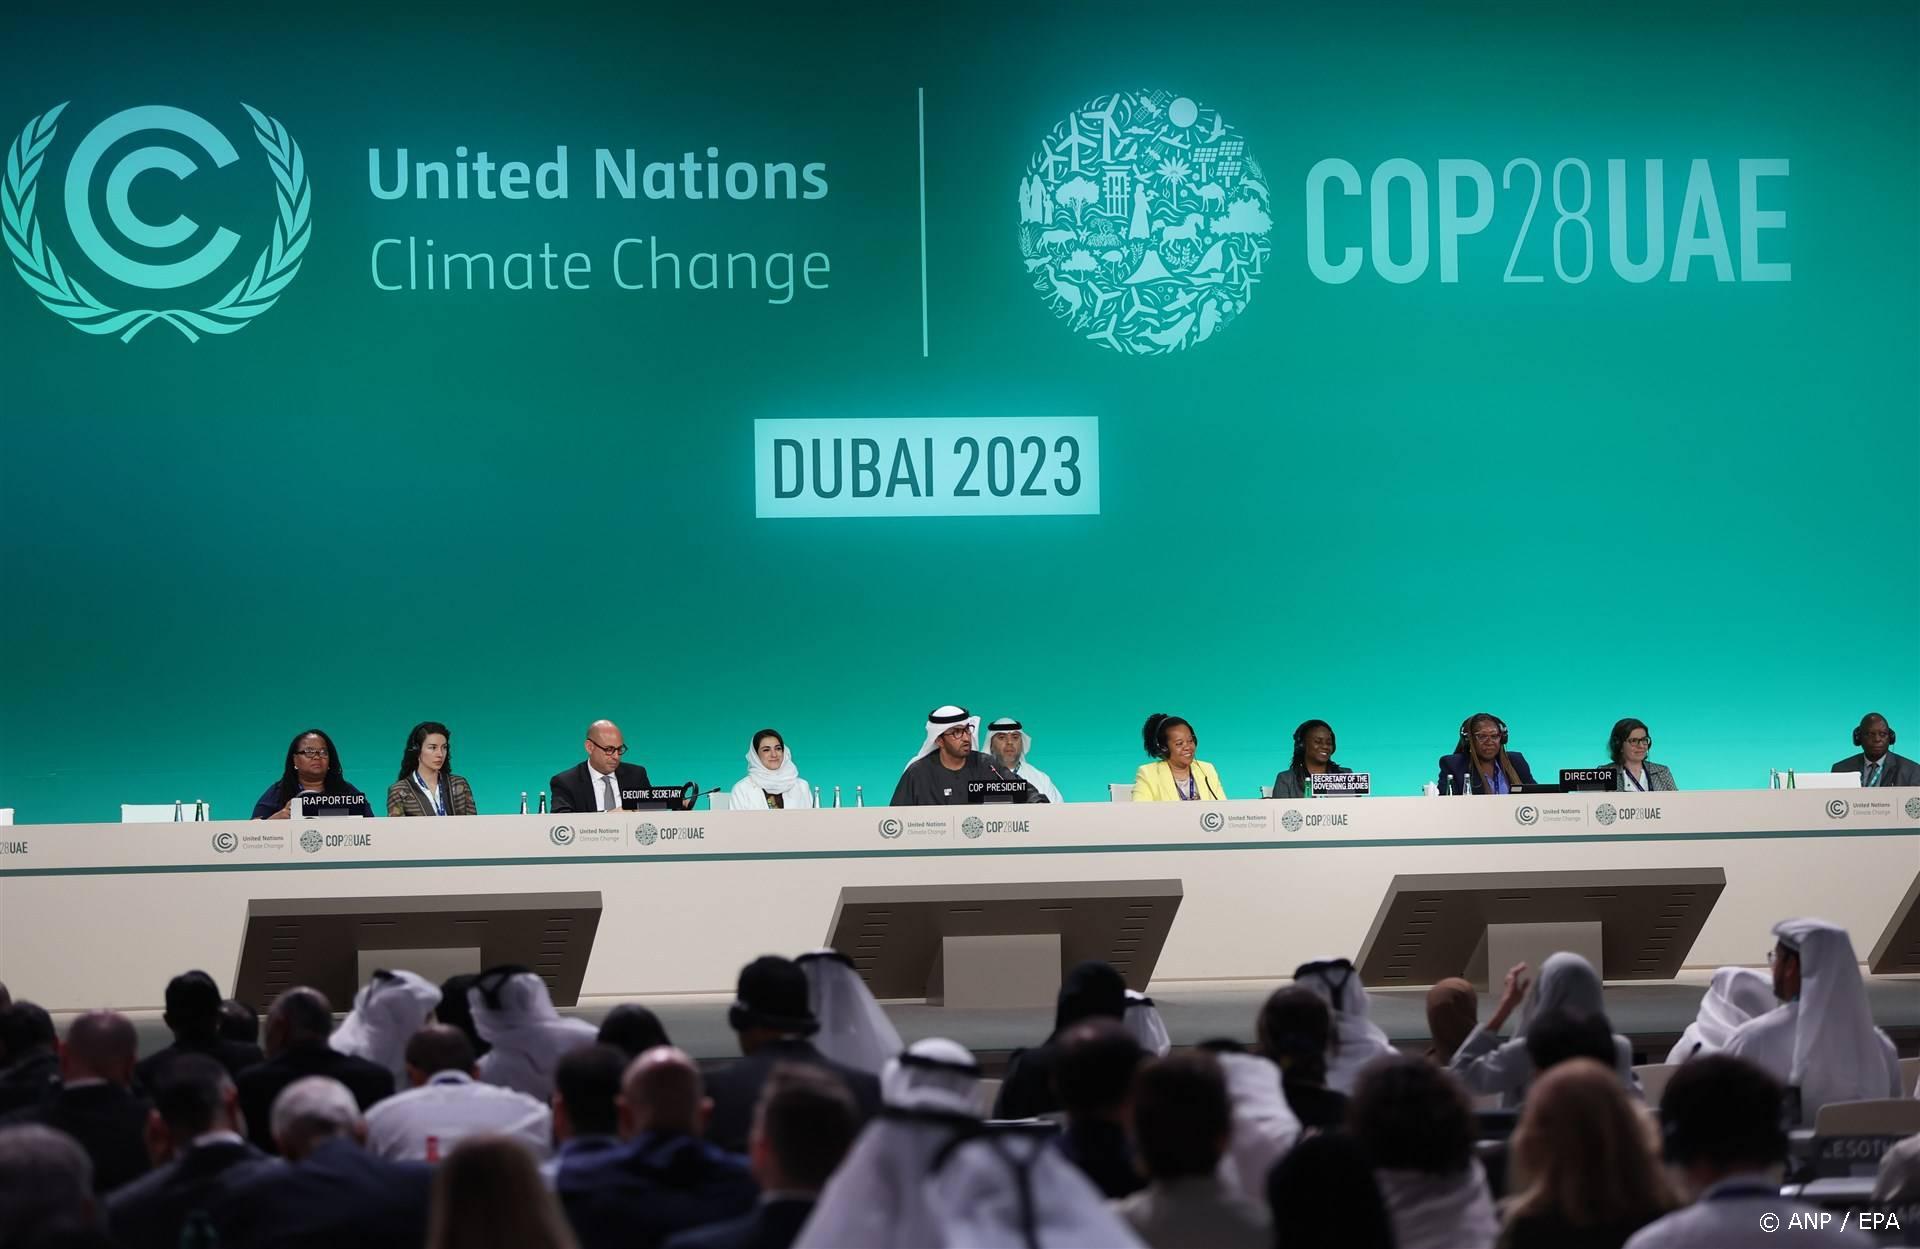 epa11023161 President of COP28 and UAE's Minister for Industry and Advanced Technology Dr. Sultan Ahmed Al Jaber (C) attends a session of the 2023 United Nations Climate Change Conference (COP28), in Dubai, United Arab Emirates, 11 December 2023. The 2023 United Nations Climate Change Conference (COP28), runs from 30 November to 12 December, and is expected to host one of the largest number of participants in the annual global climate conference as over 70,000 estimated attendees, including the member states of the UN Framework Convention on Climate Change (UNFCCC), business leaders, young people, climate scientists, Indigenous Peoples and other relevant stakeholders will attend.  EPA/ALI HAIDER